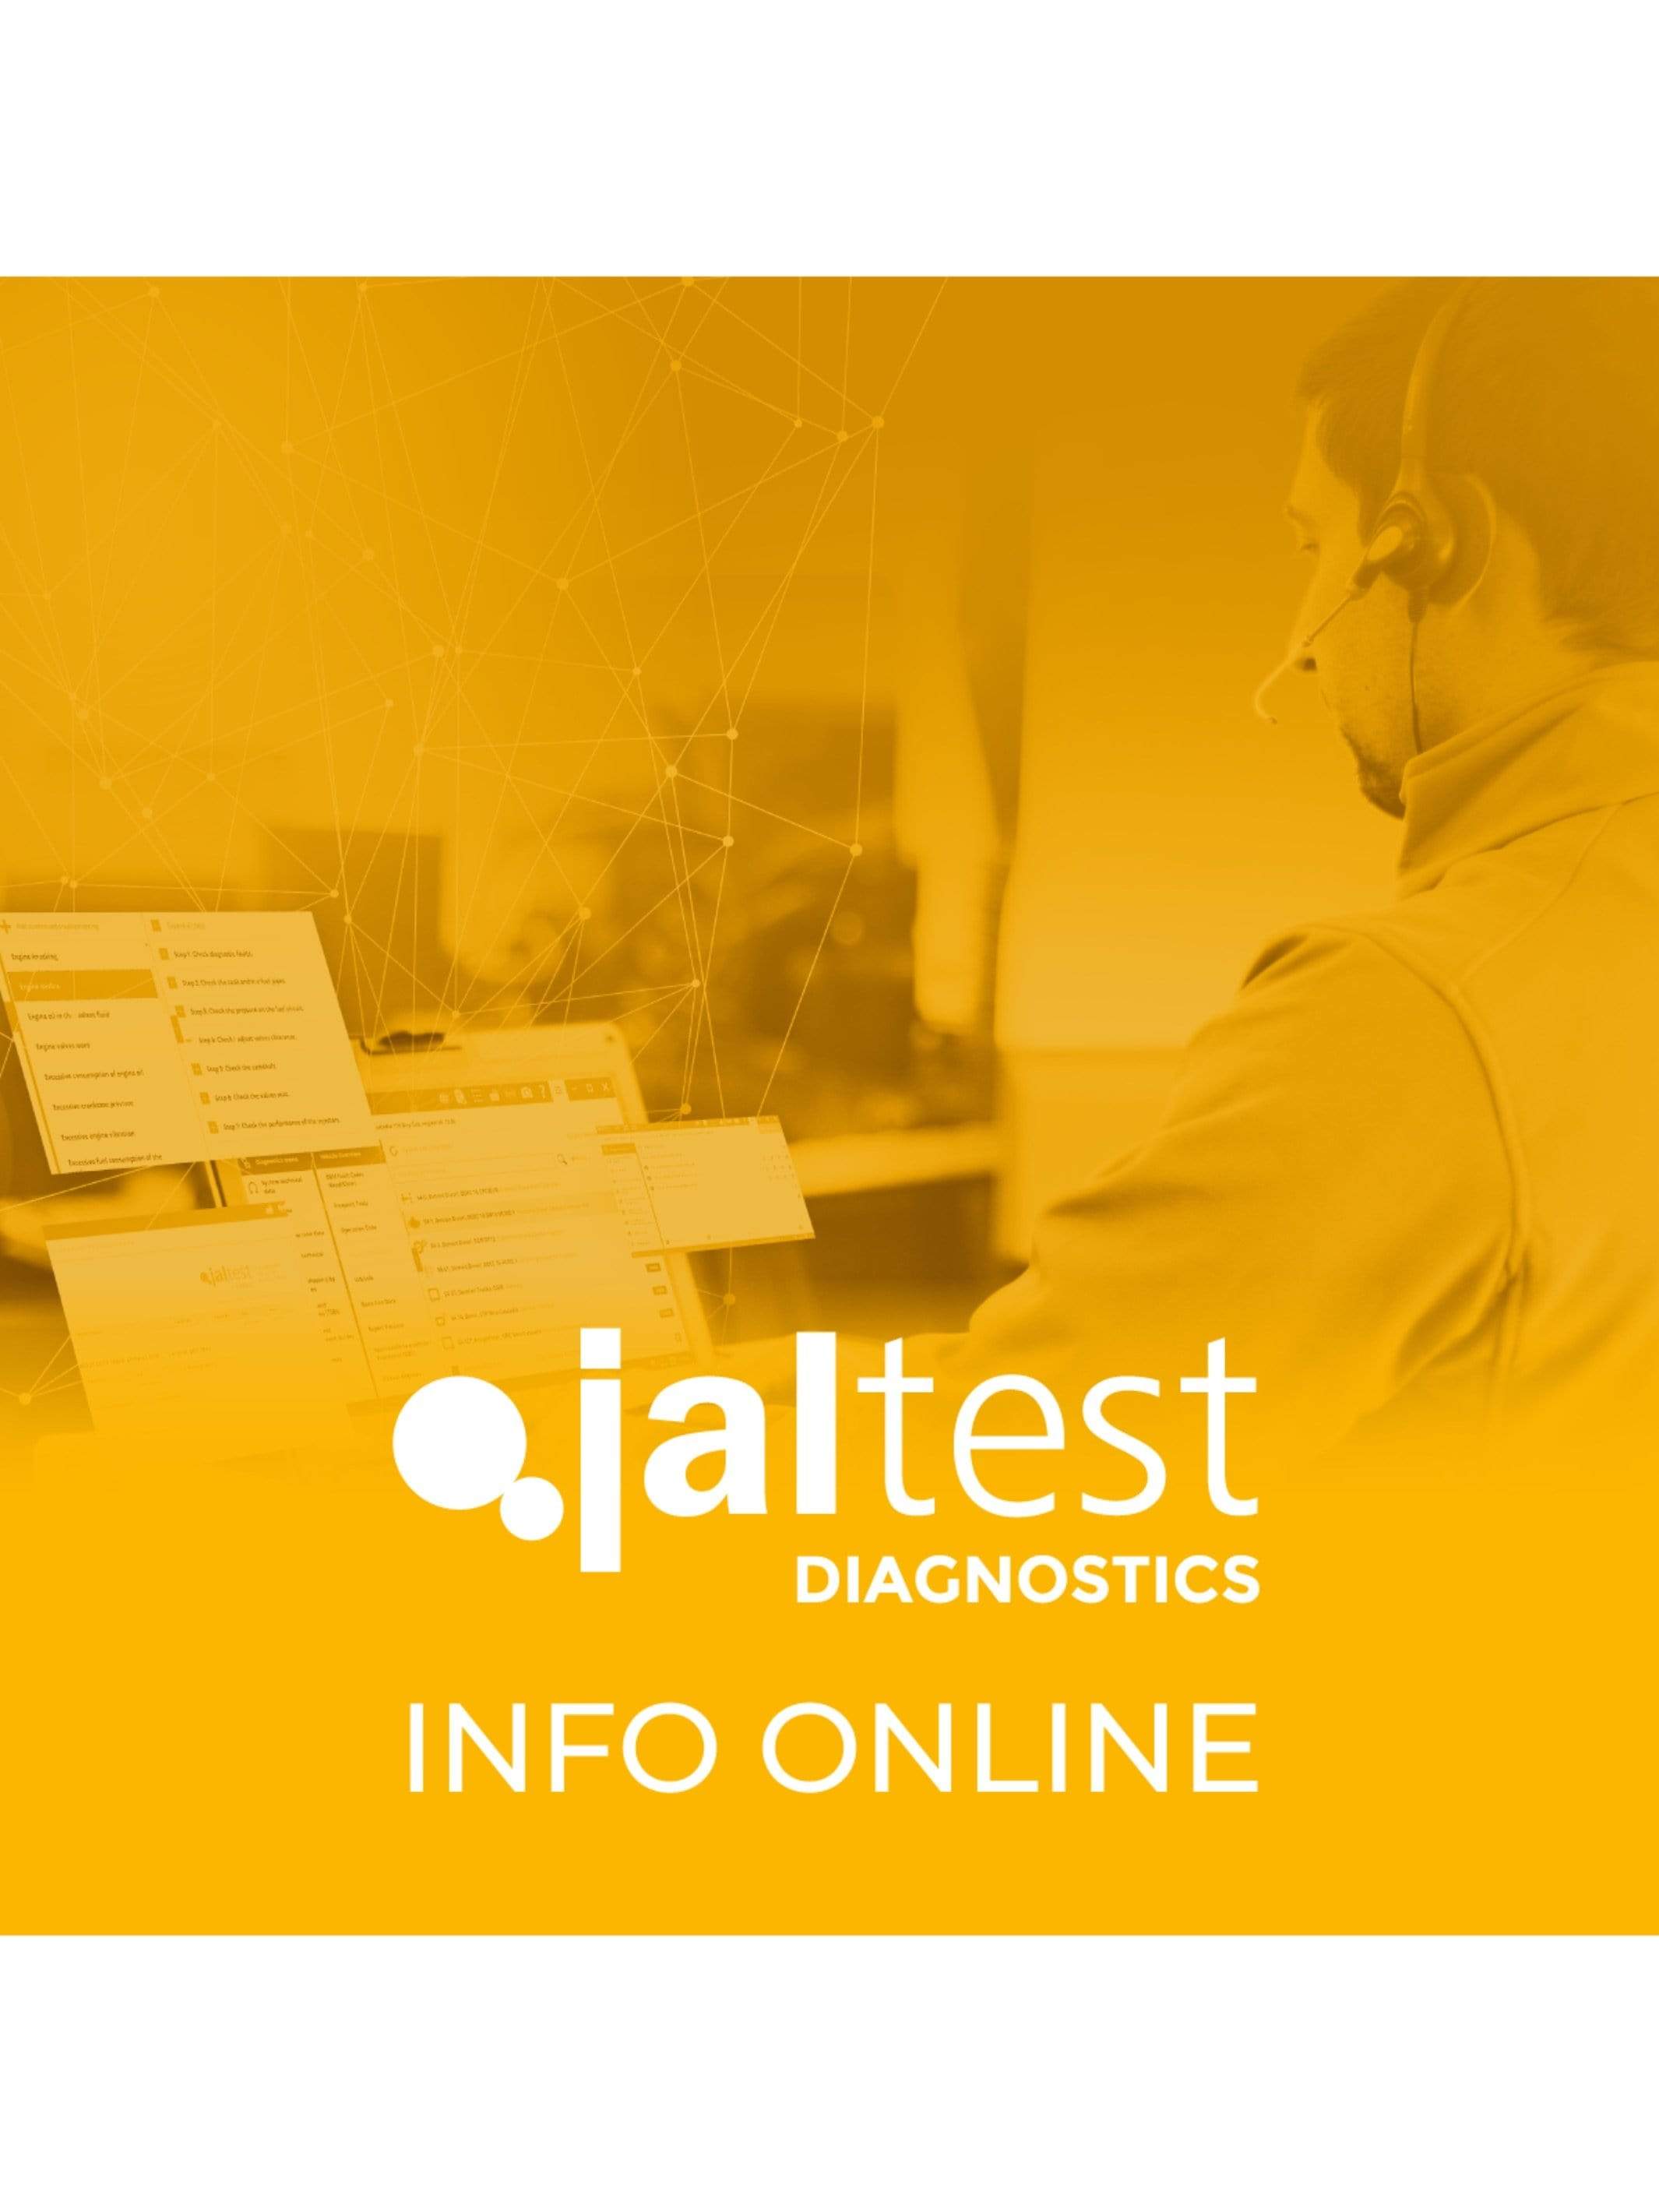 Jaltest Off Highway Diagnostic Info - Jaltest Agricultural, Construction, Heavy Equipment MH & Power Systems Diagnostic Tool Kit